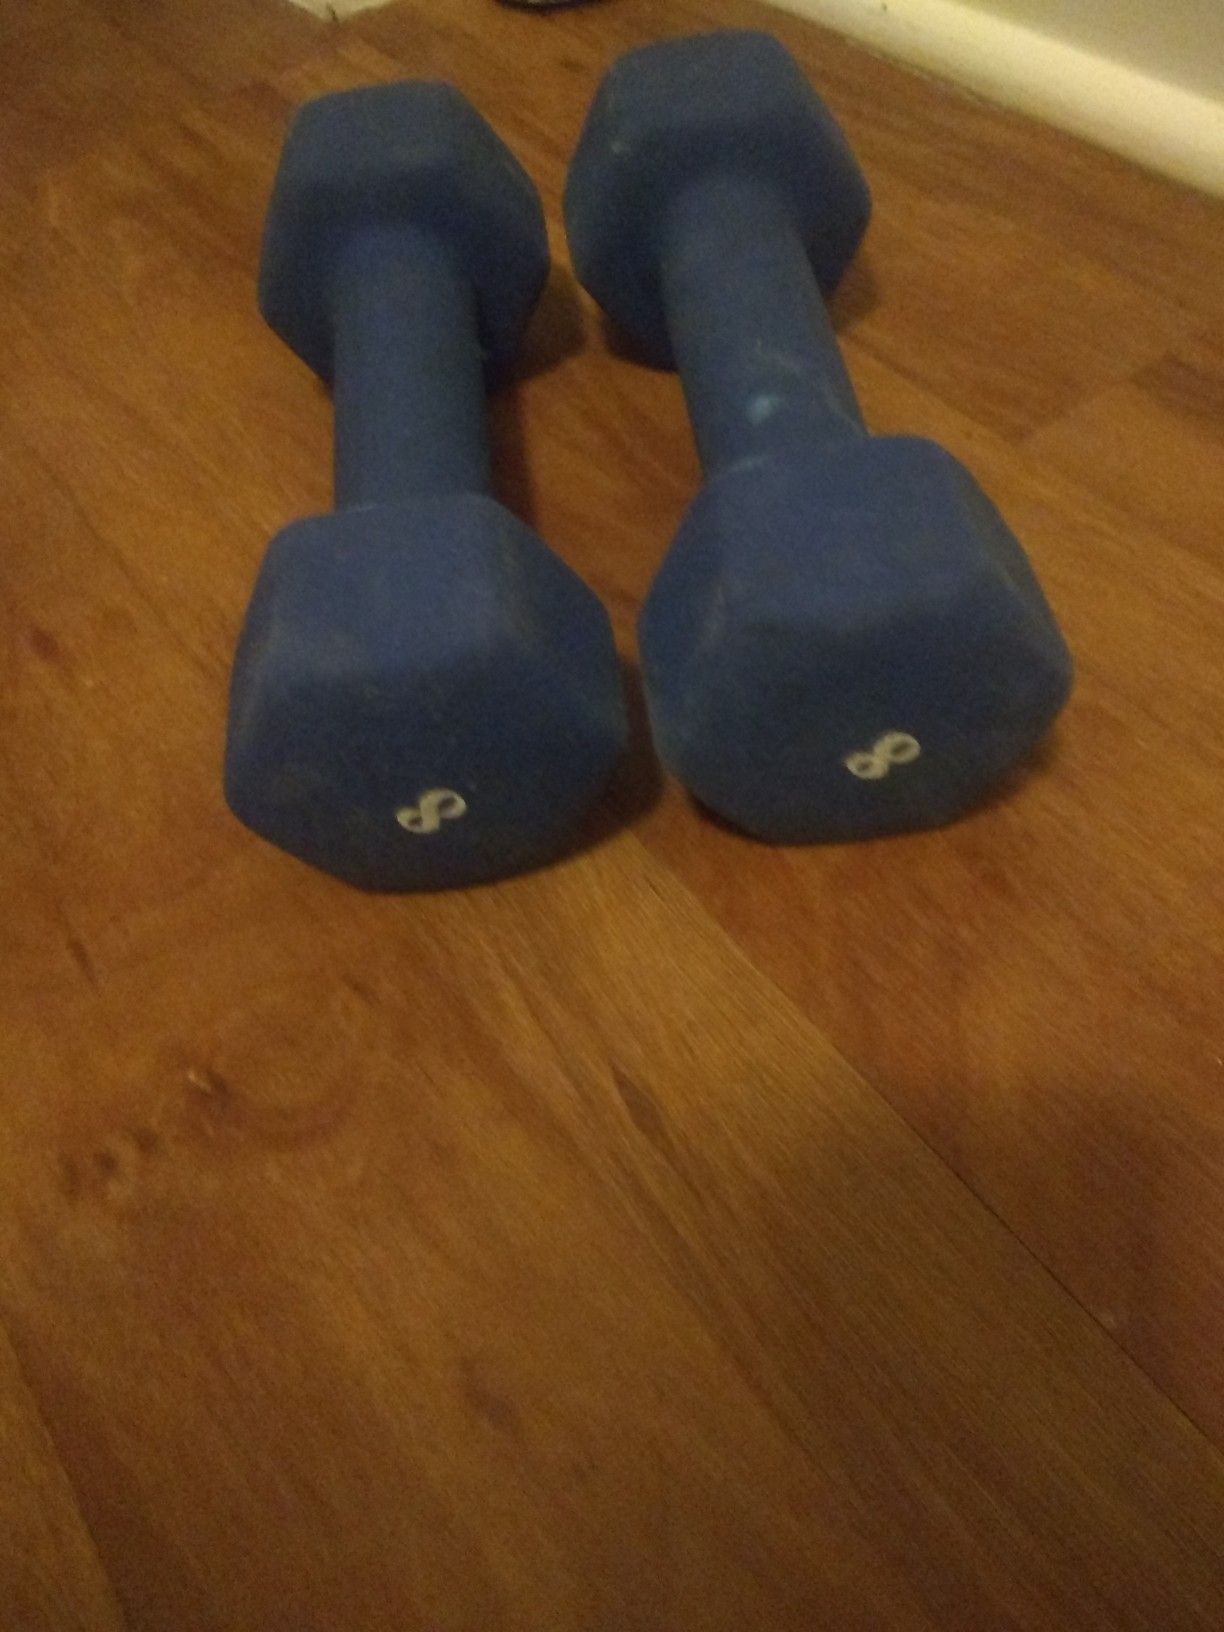 Weights dumb bells perfect for a lady..